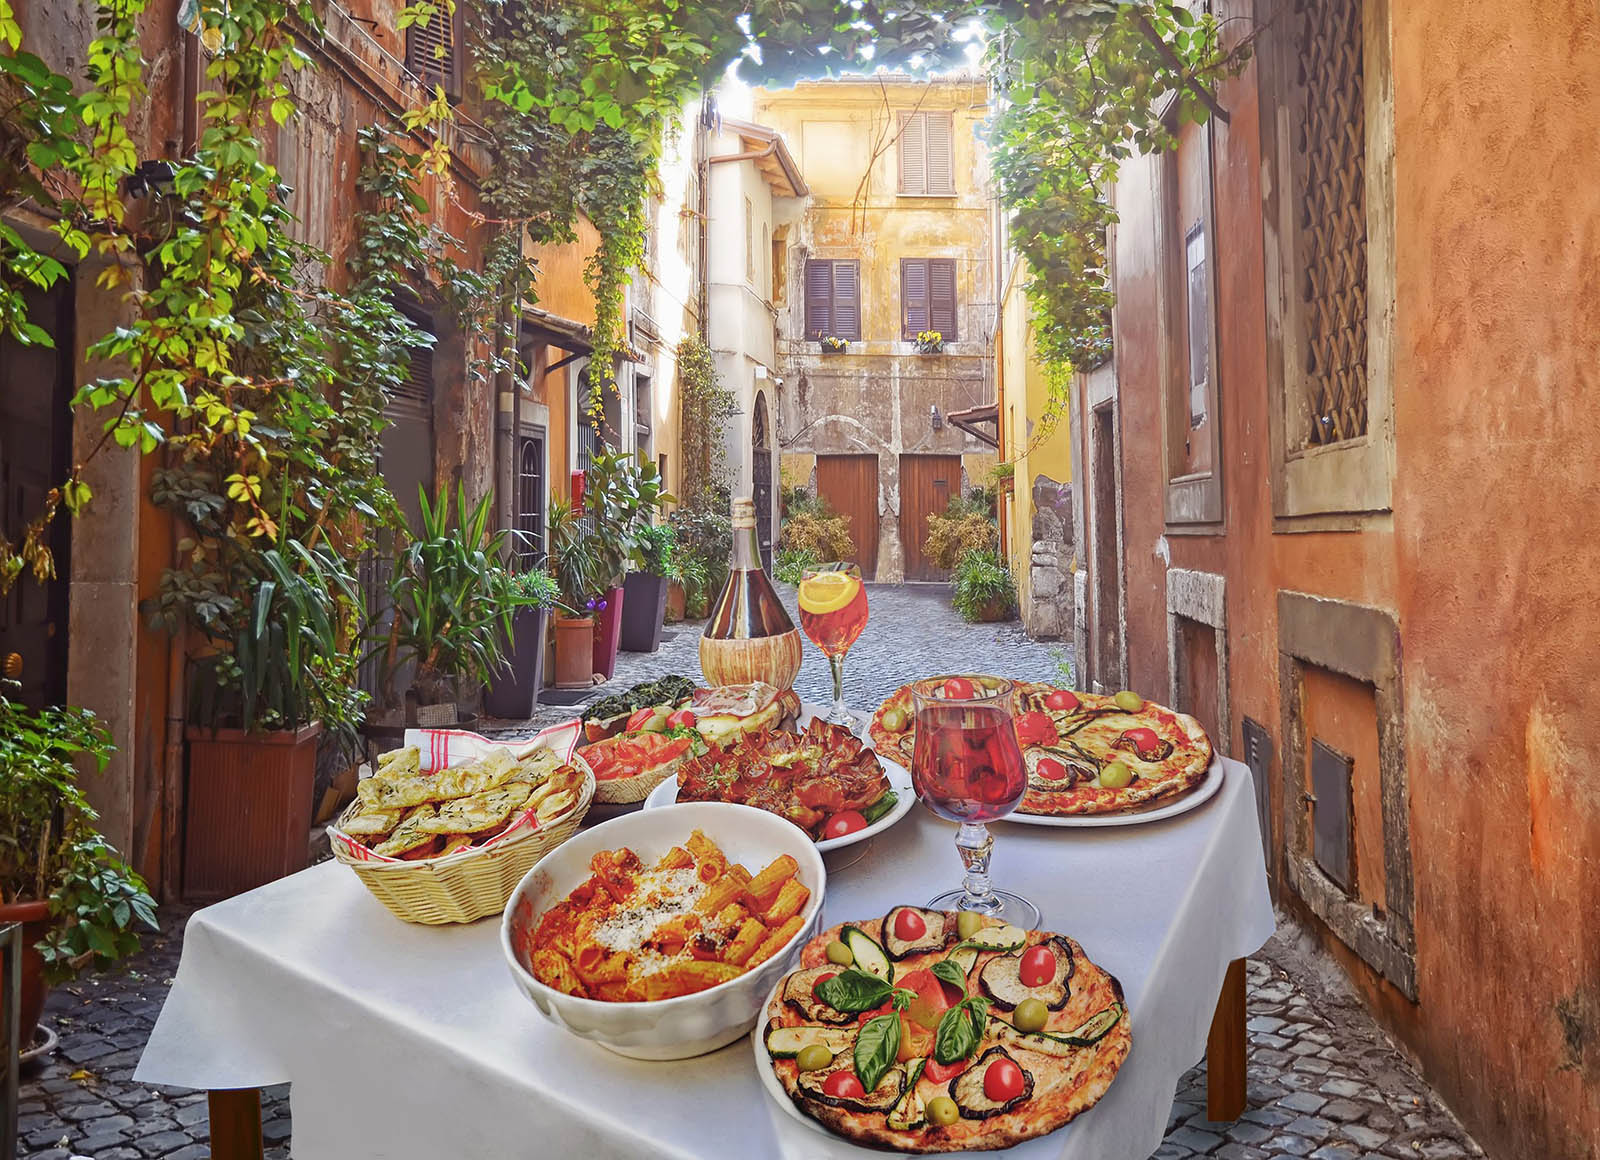 Travel to Italy for a Weekend and We’ll Predict What Your Life Will Be Like in 5 Years Pasta , Pizza And Homemade Food Arrangement In A Restaurant Rome